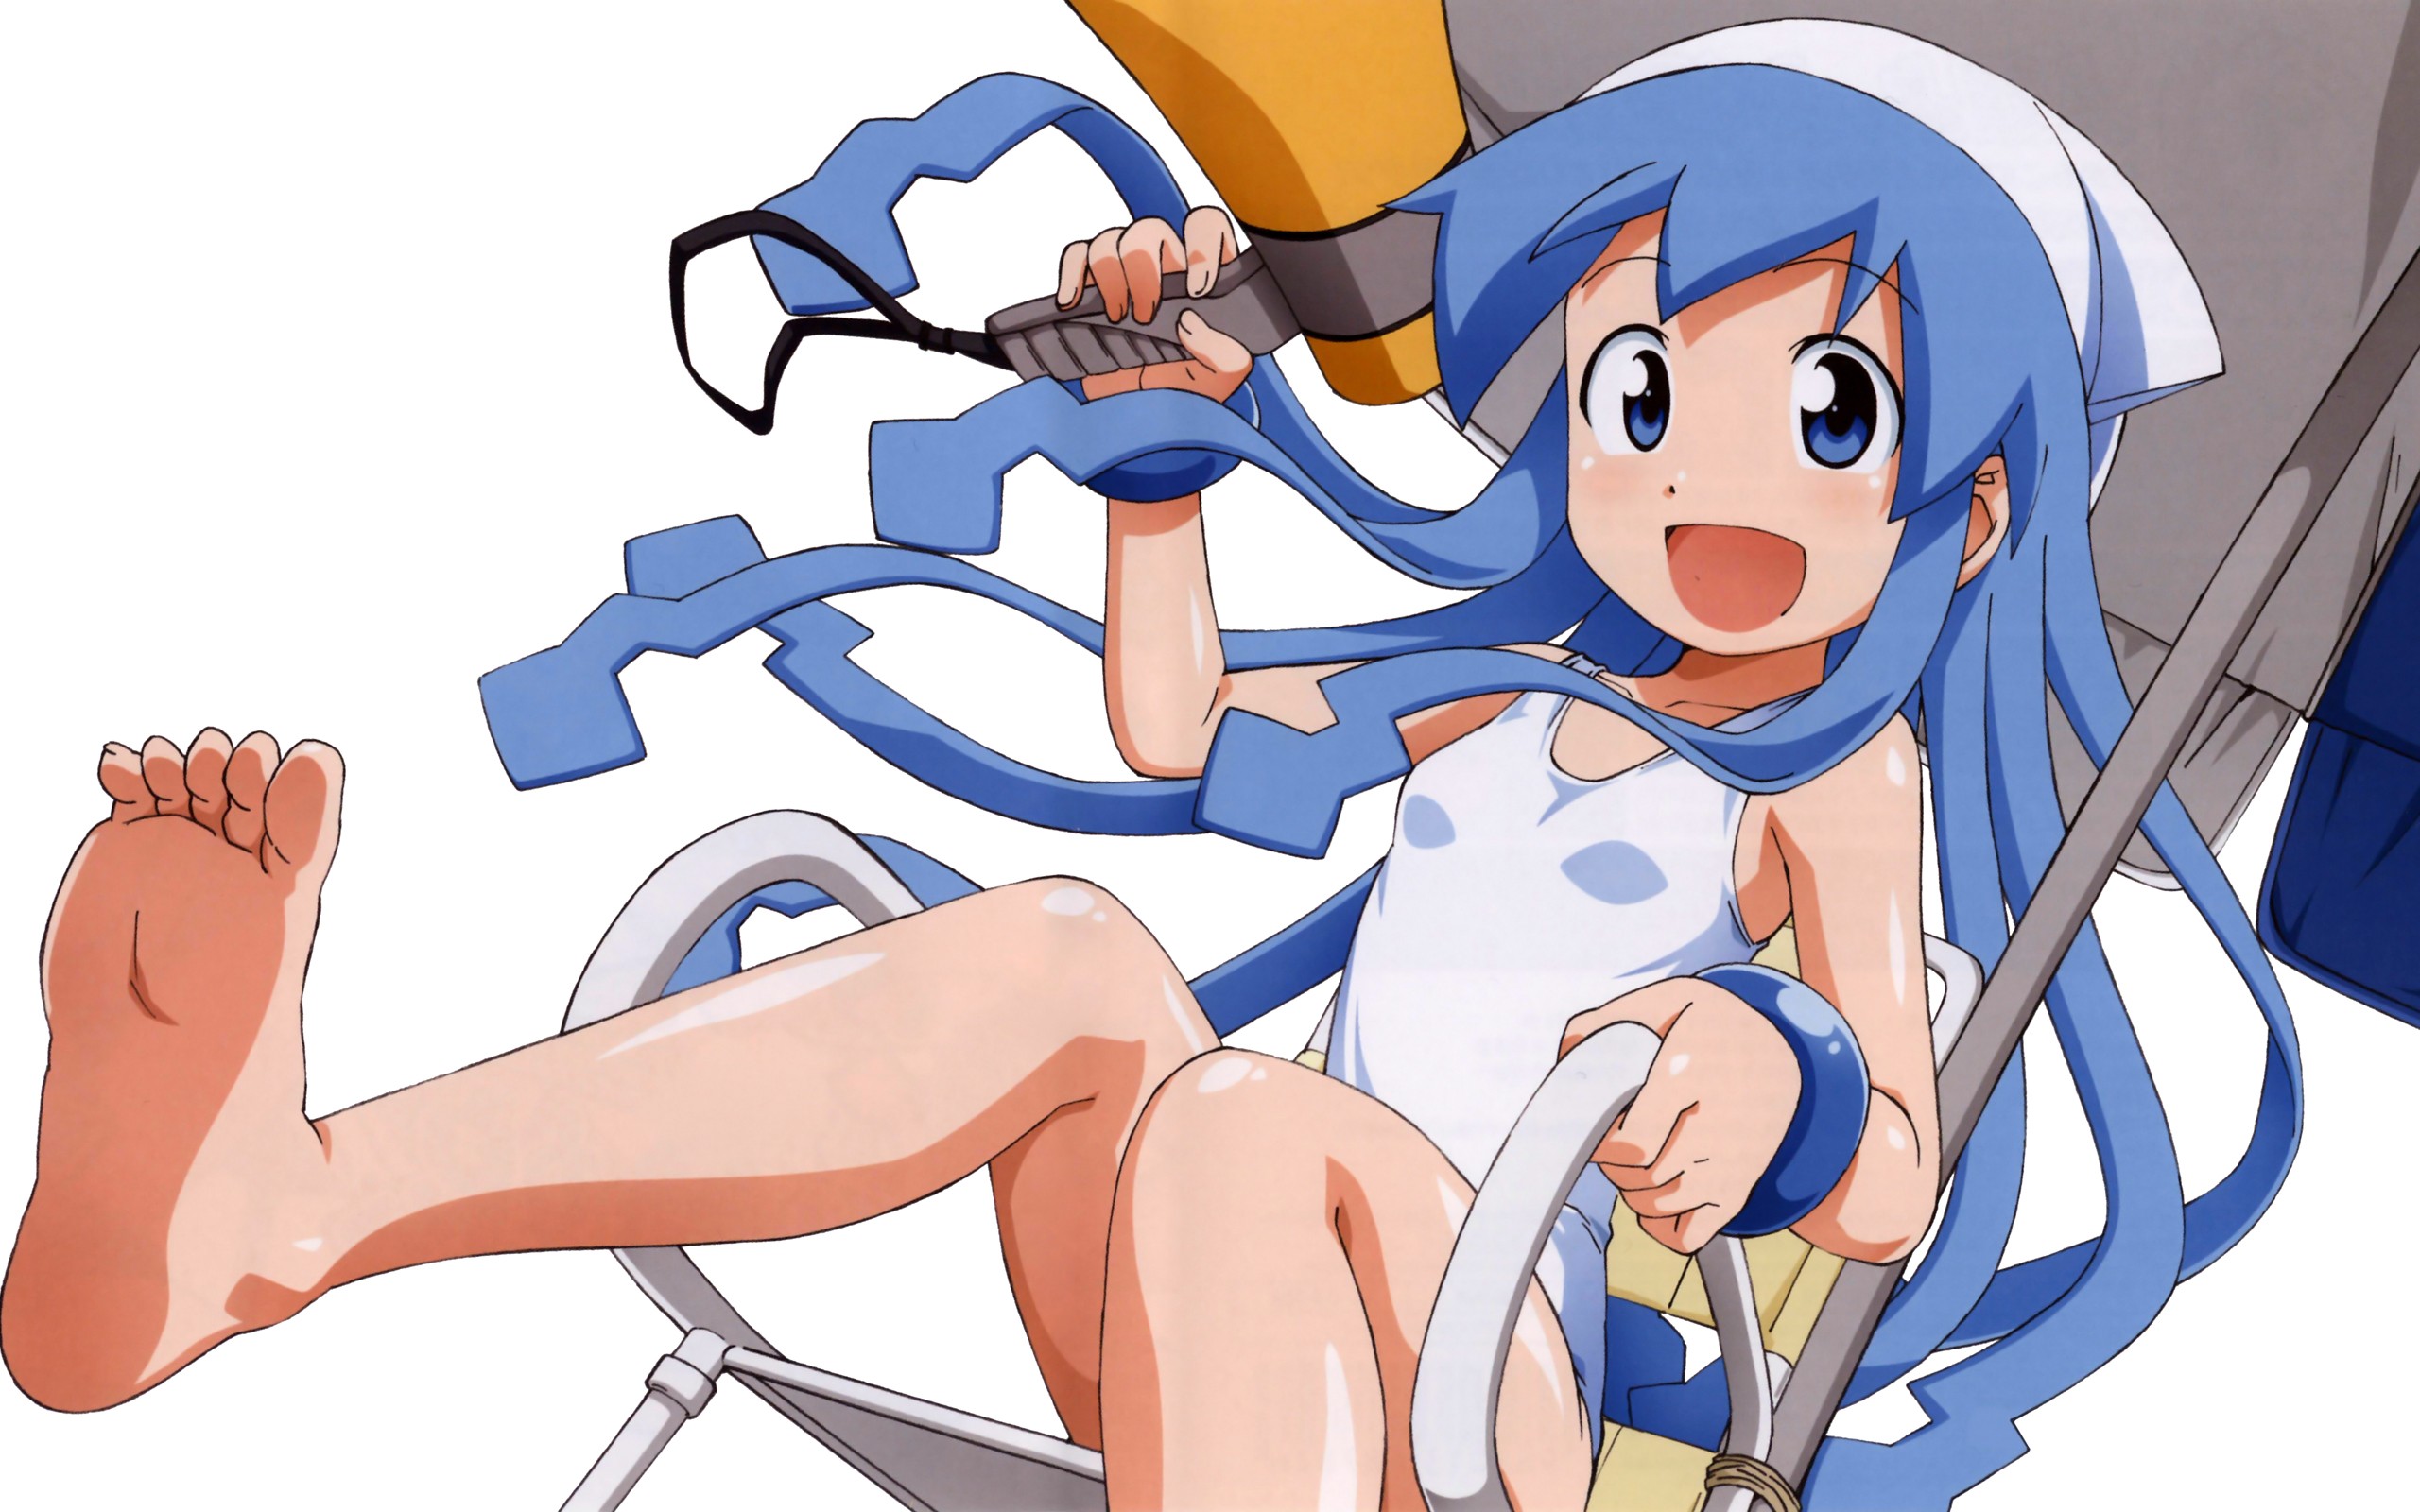  Ika Musume Cellphone FHD pic